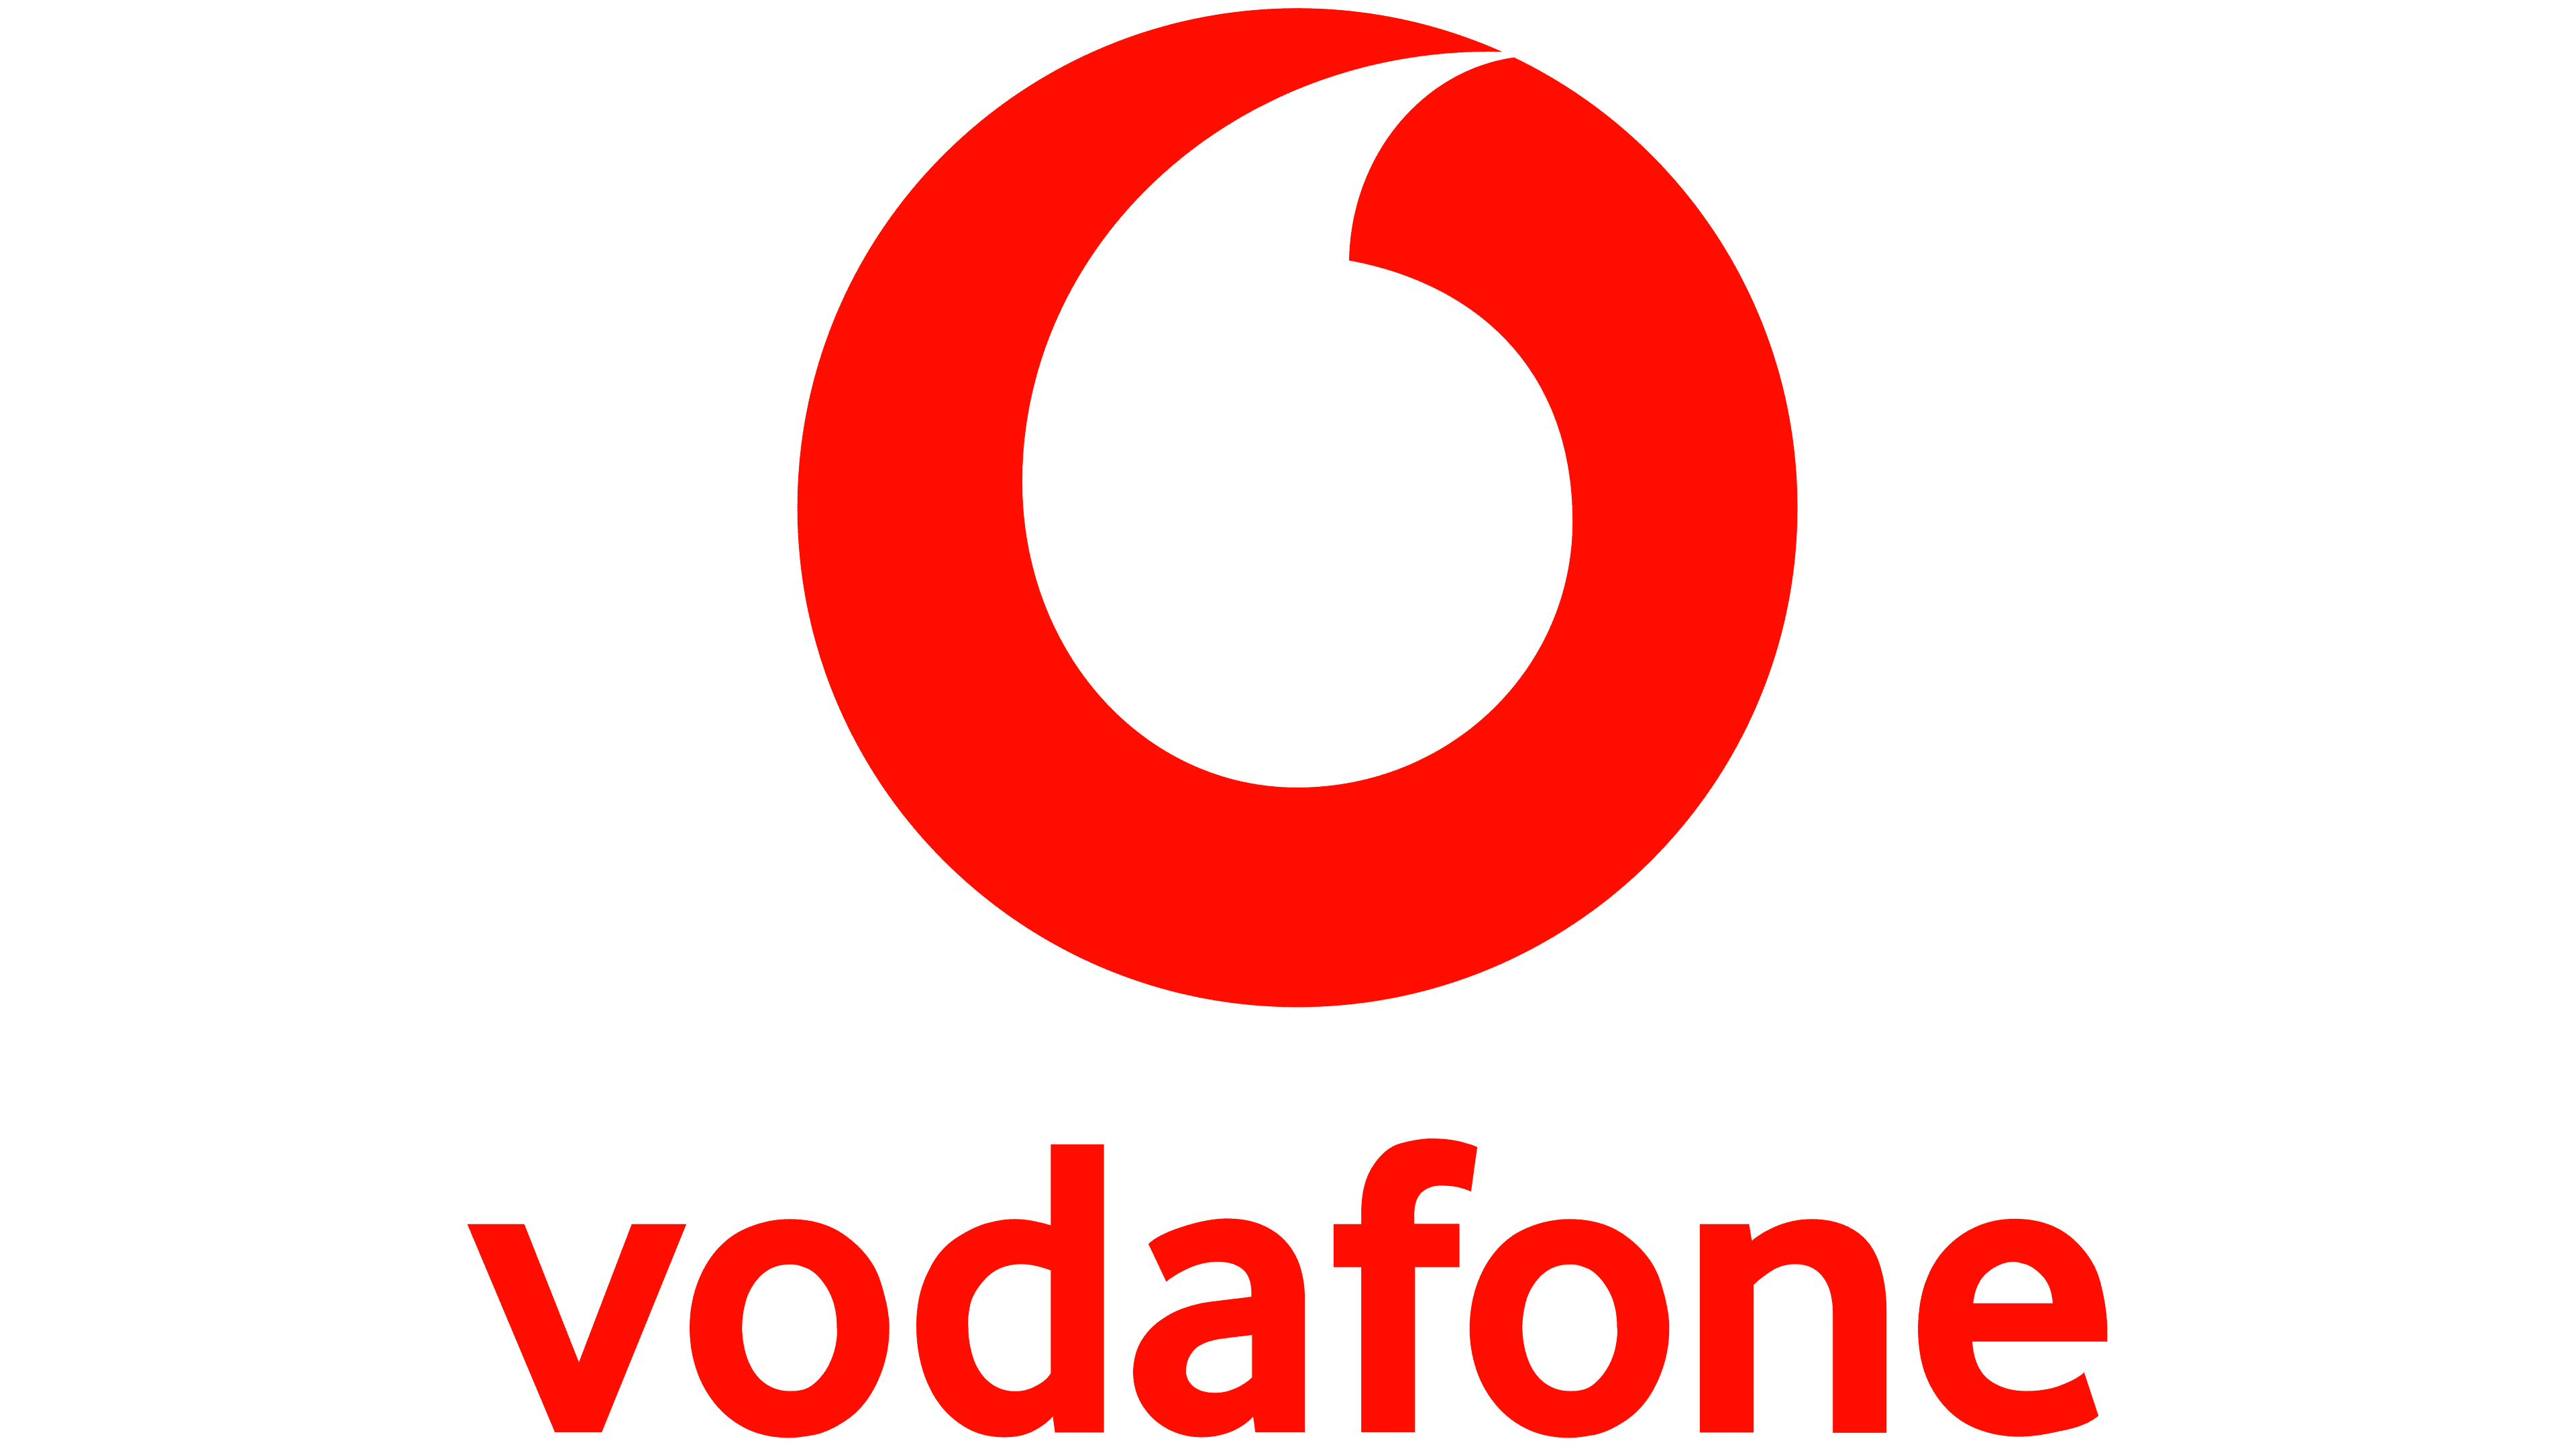 Vodafone Warns of Limited Services for Six Days Soon in Hungary